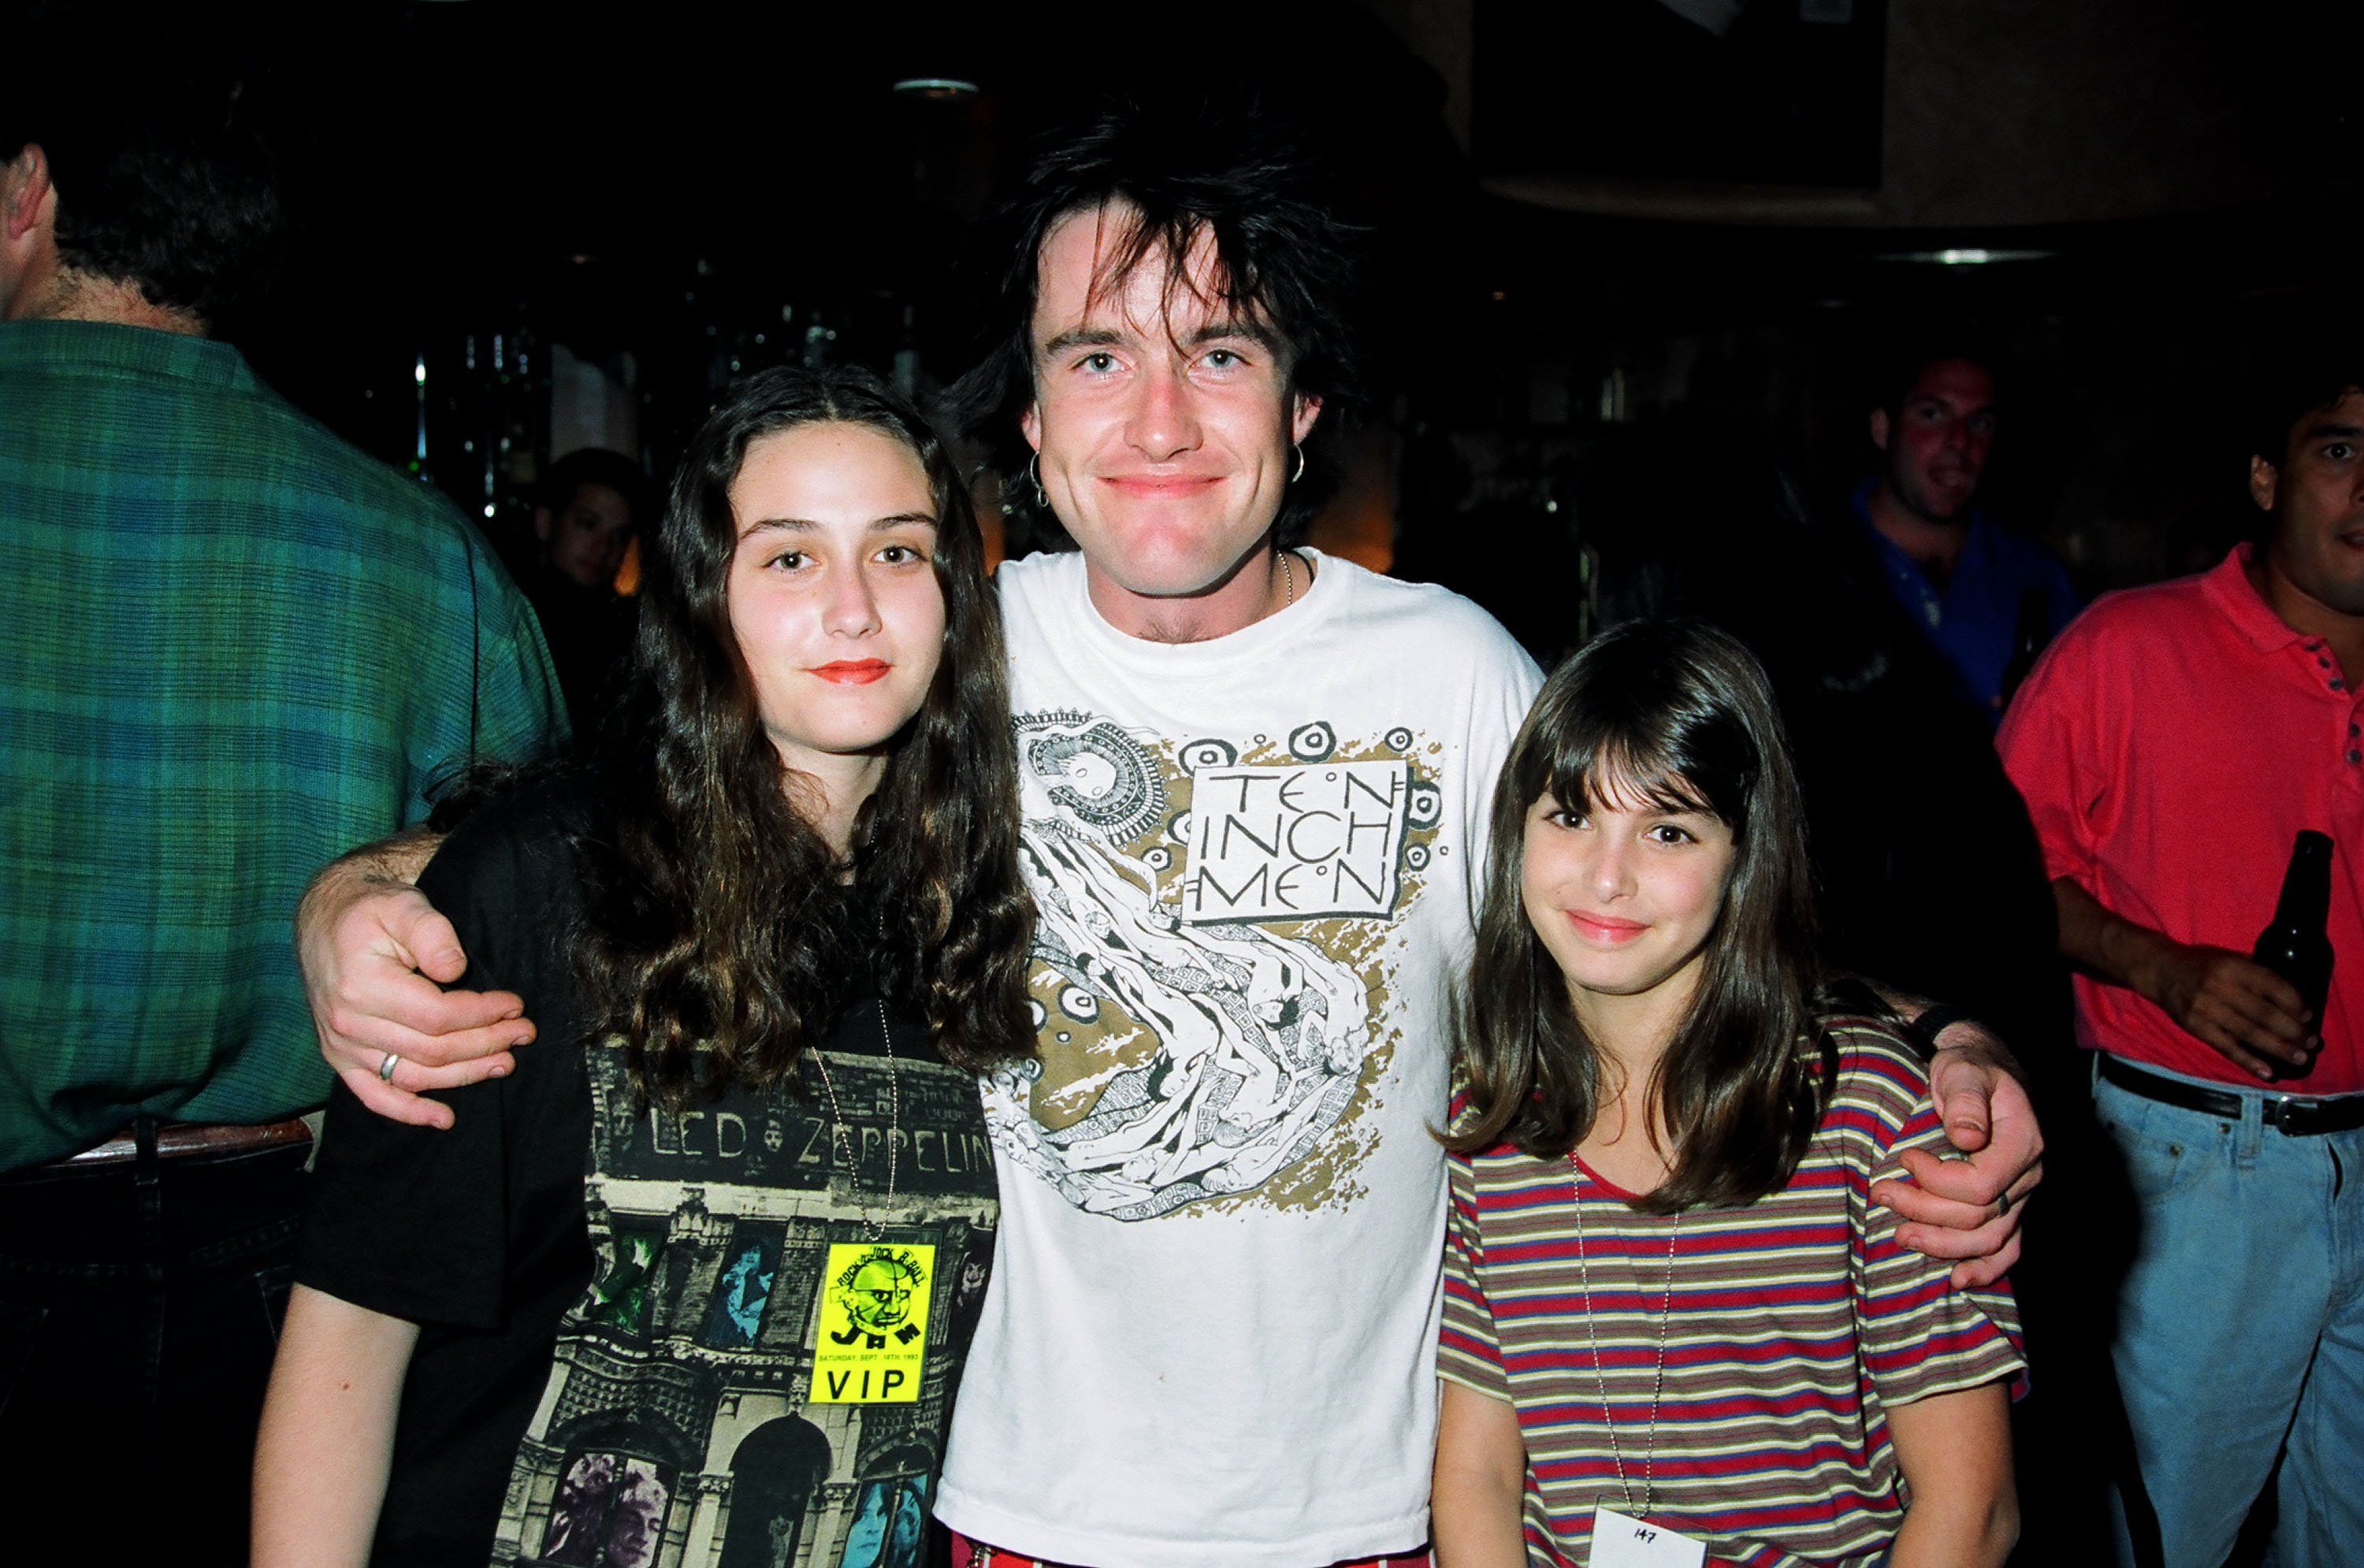 Dominic Griffin of 'The Real World Los Angeles' poses with his arms around two women at an event in 1993